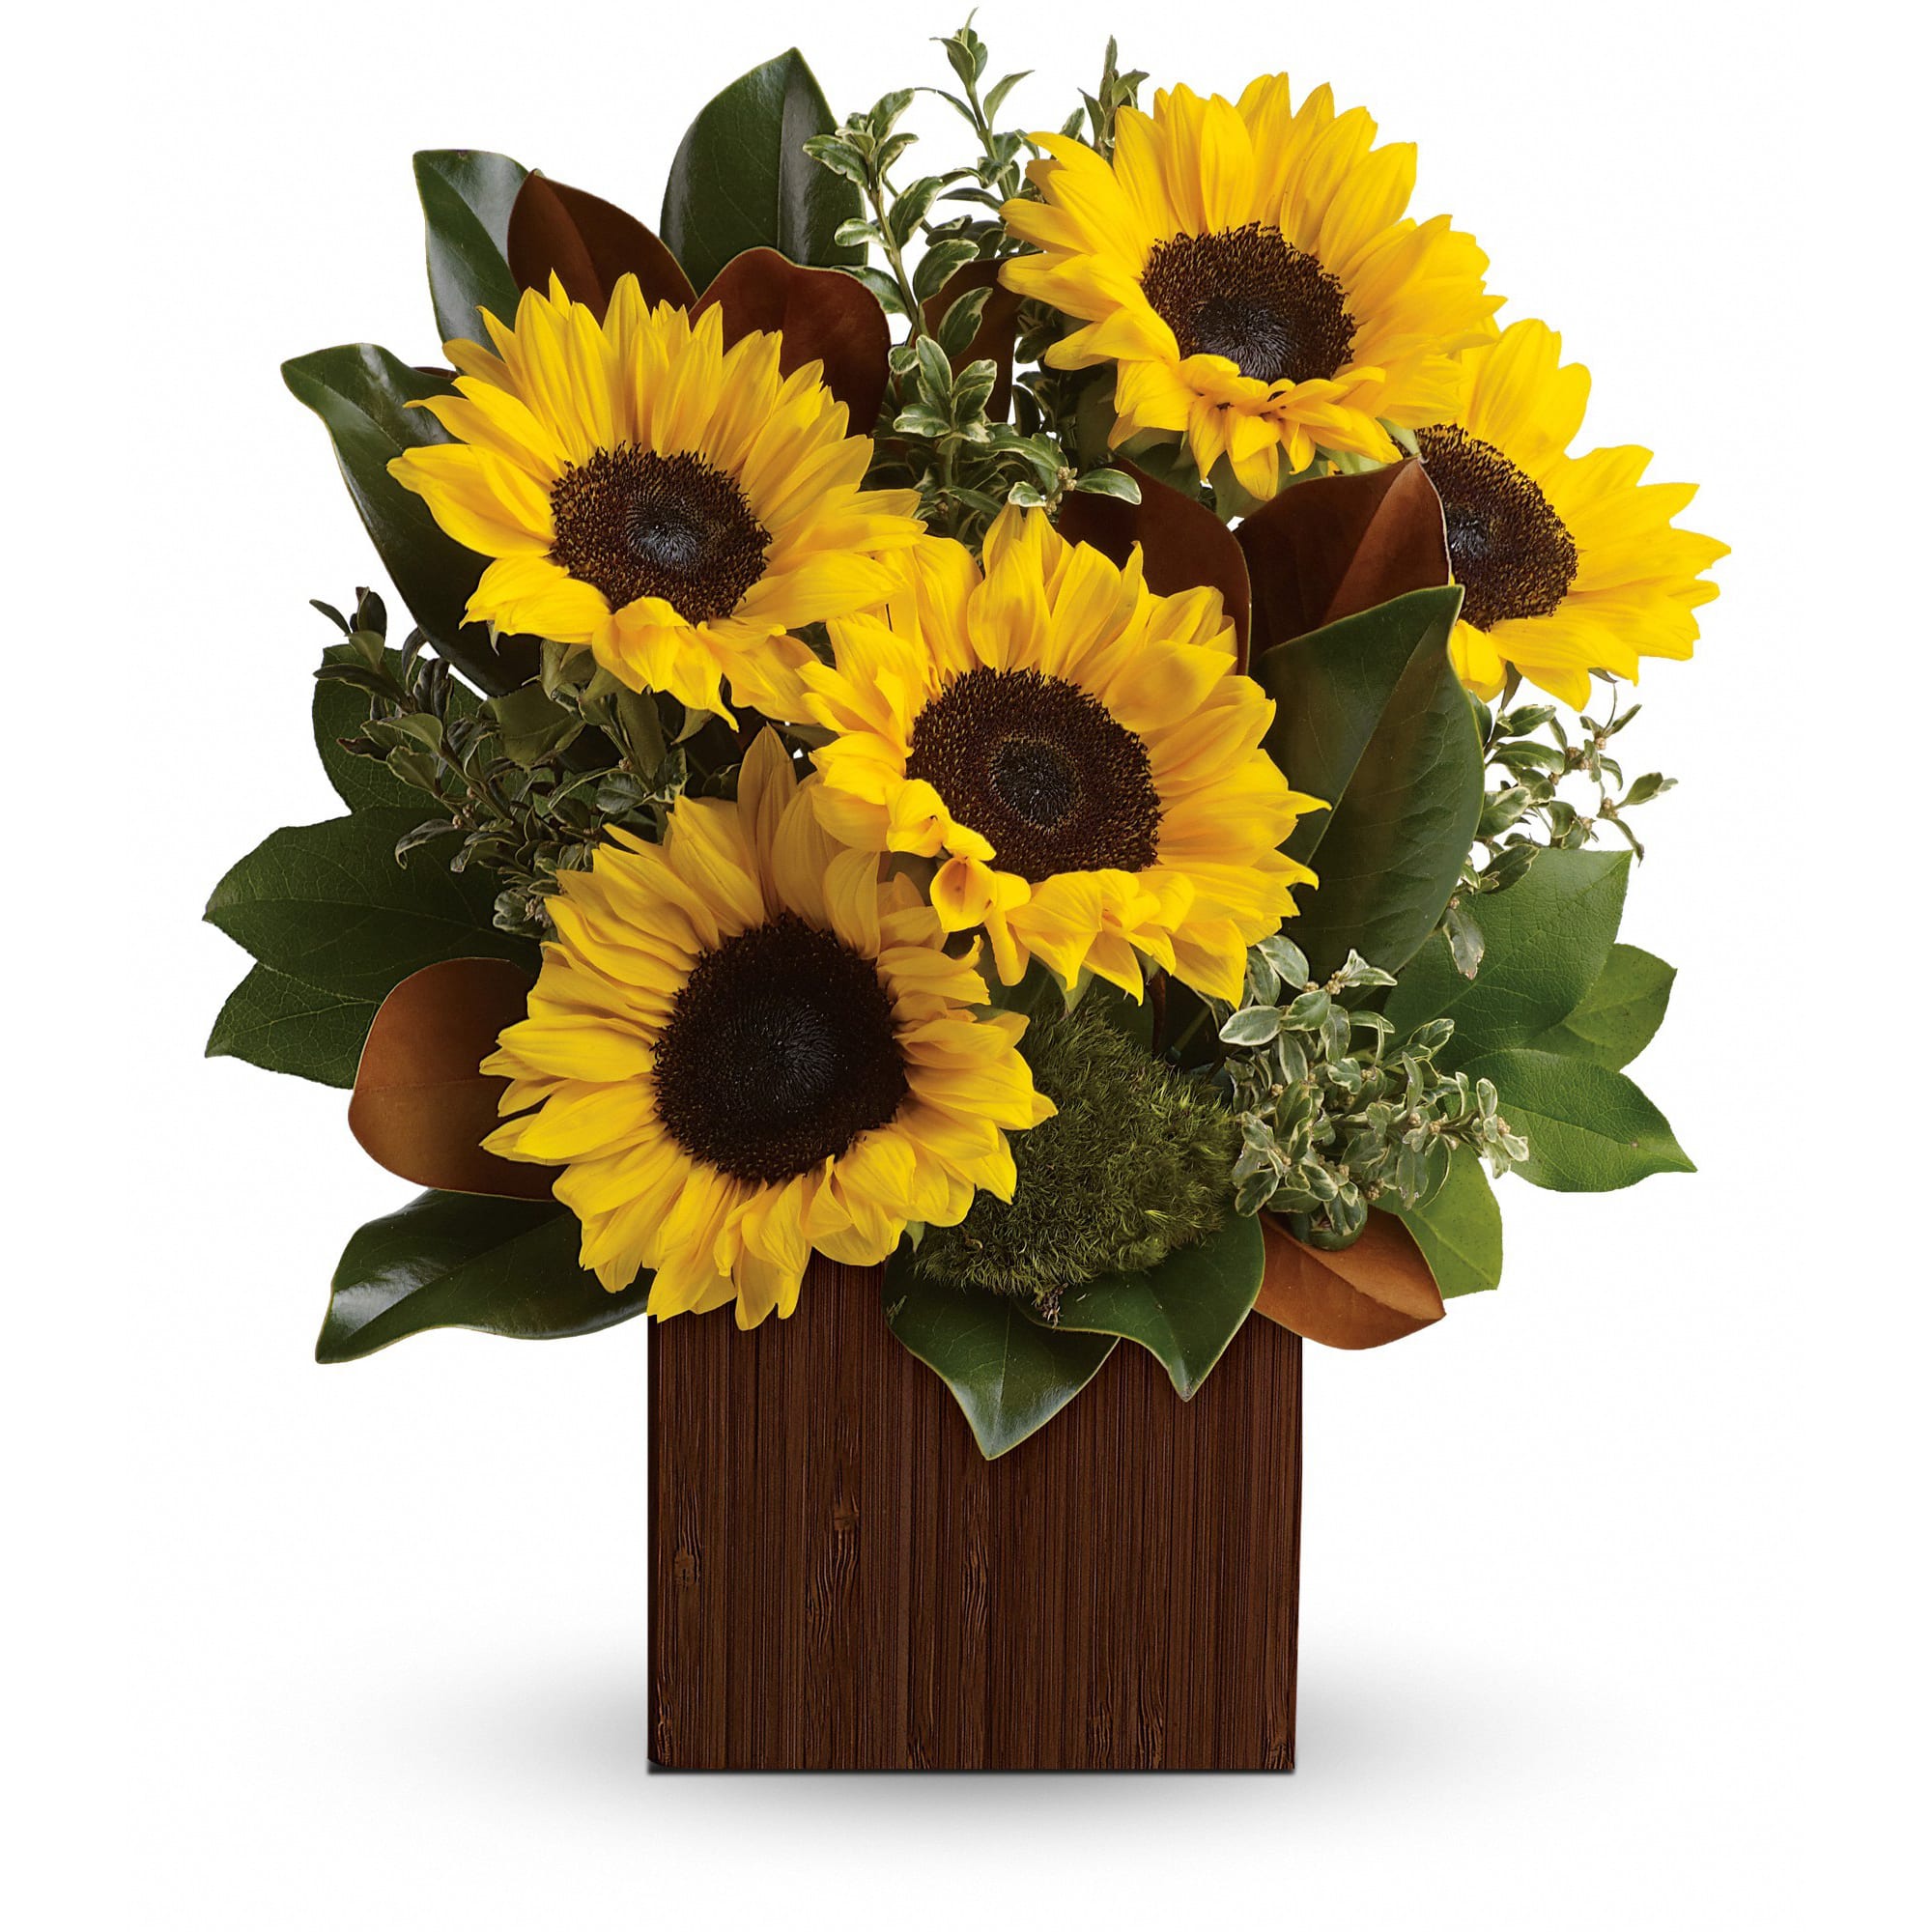 Sun Beams - Rise and shine! Send her a sunrise with this golden bouquet of bright-as-day sunflowers. It's the perfect gift for the light of your life. 